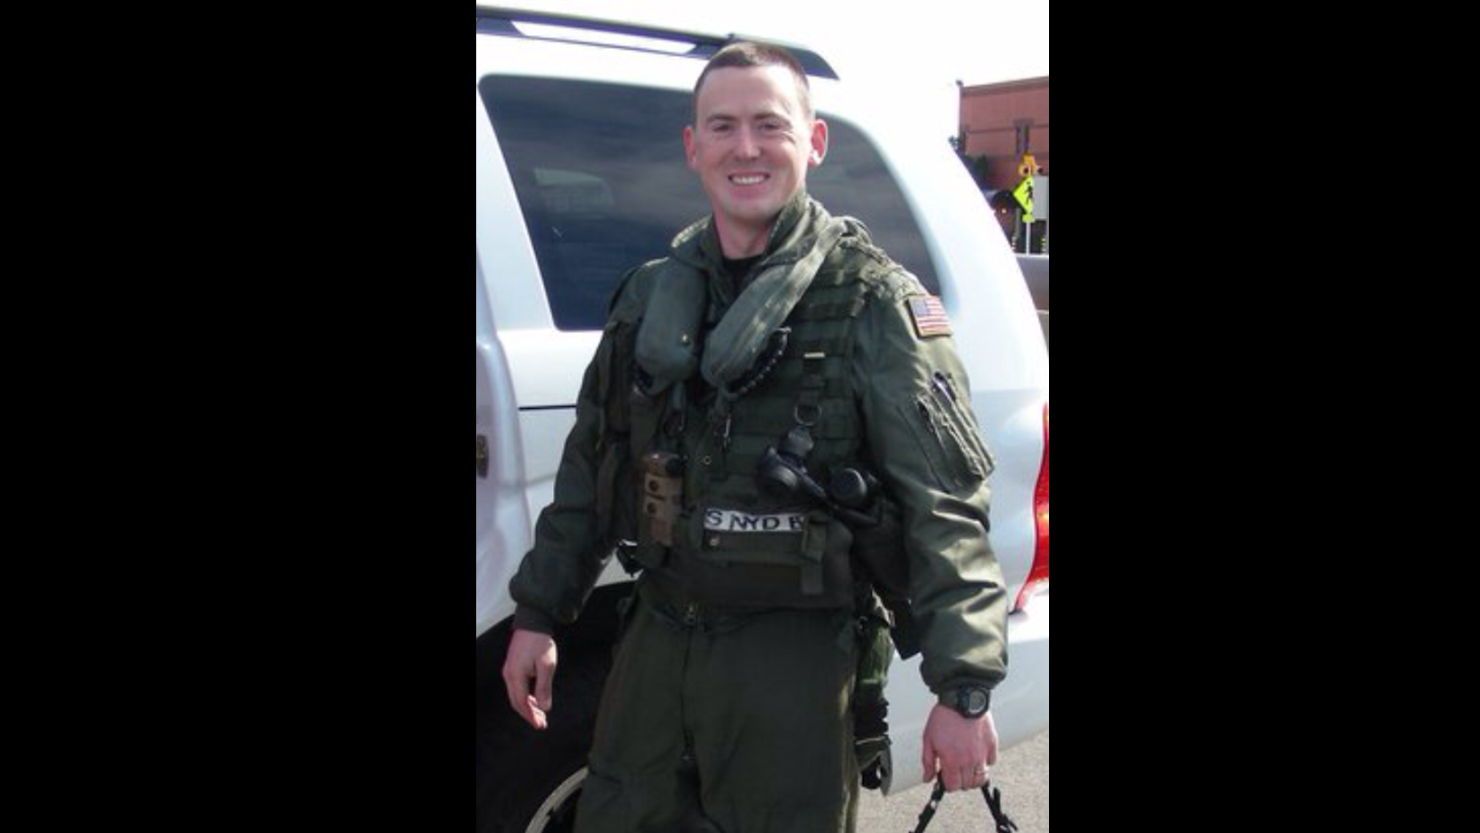 LT Sean Christopher Snyder died when the helicopter he was piloting crashed off the coast of Virginia. 